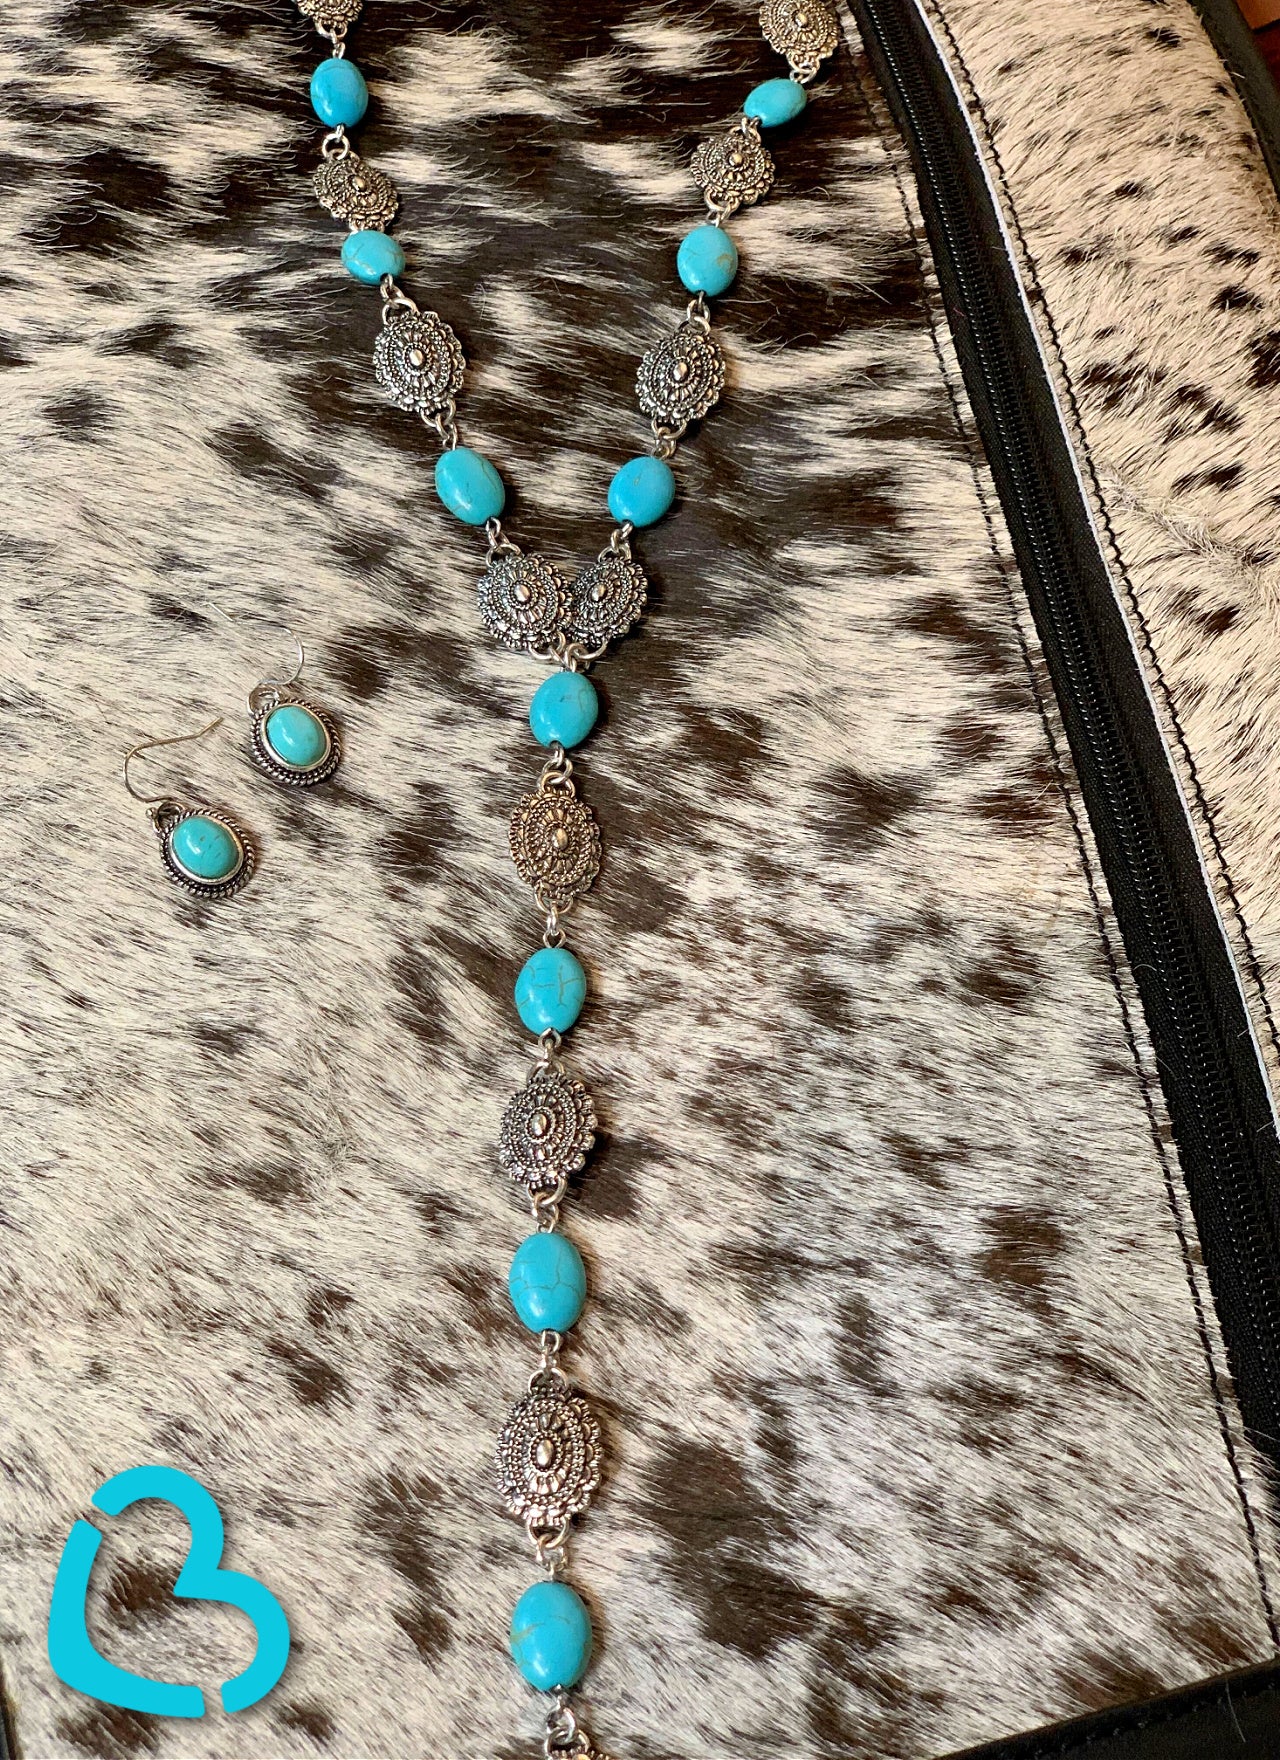 The Kingston Springs Necklace in Turquoise Jewelry 19 